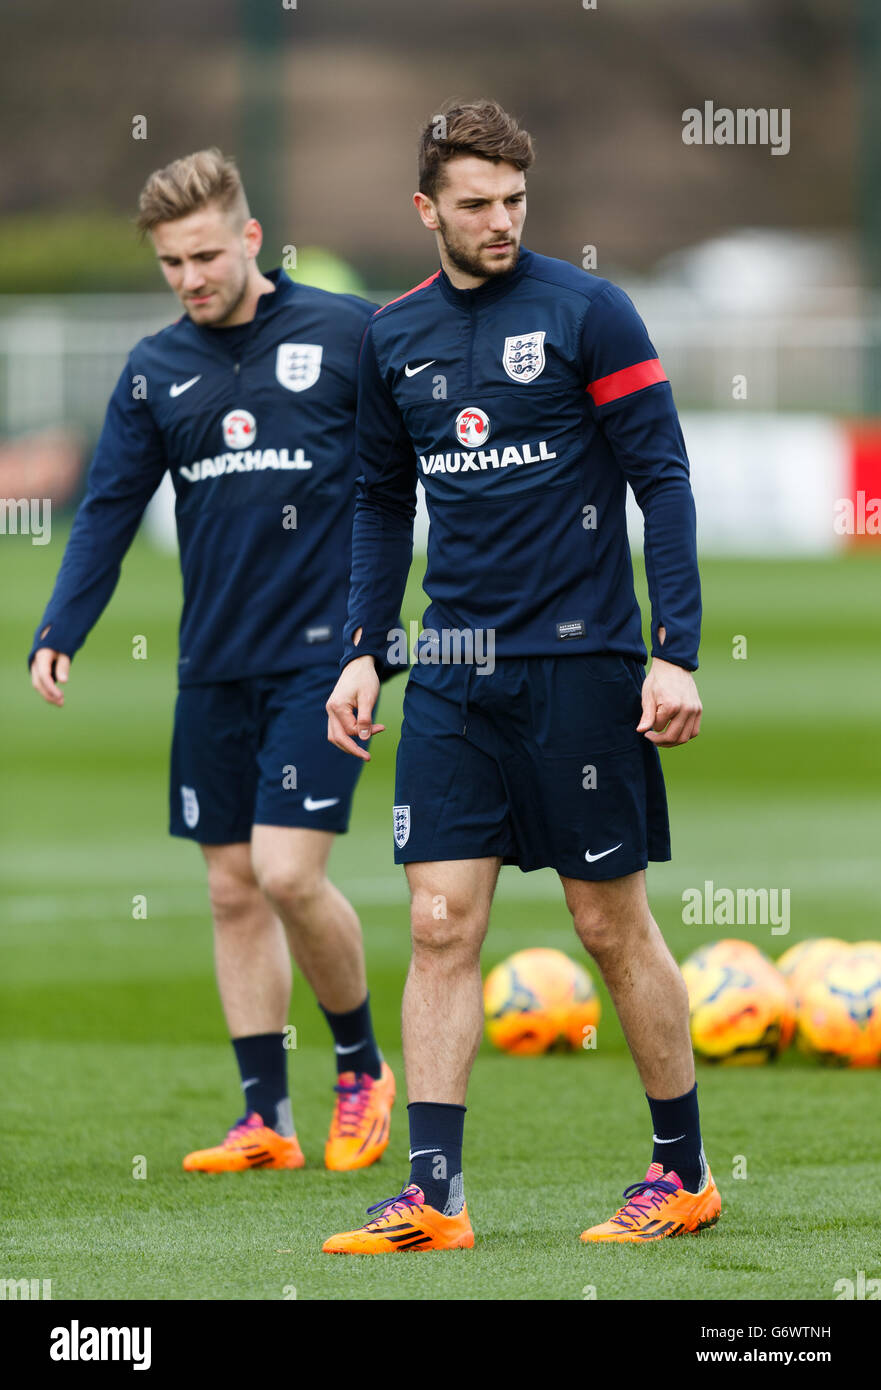 Soccer - International Friendly - England v Denmark - England Training Session - Enfield Training Centre. England's Jay Rodriguez, (right) and Luke Shaw, (left) during the training session Stock Photo